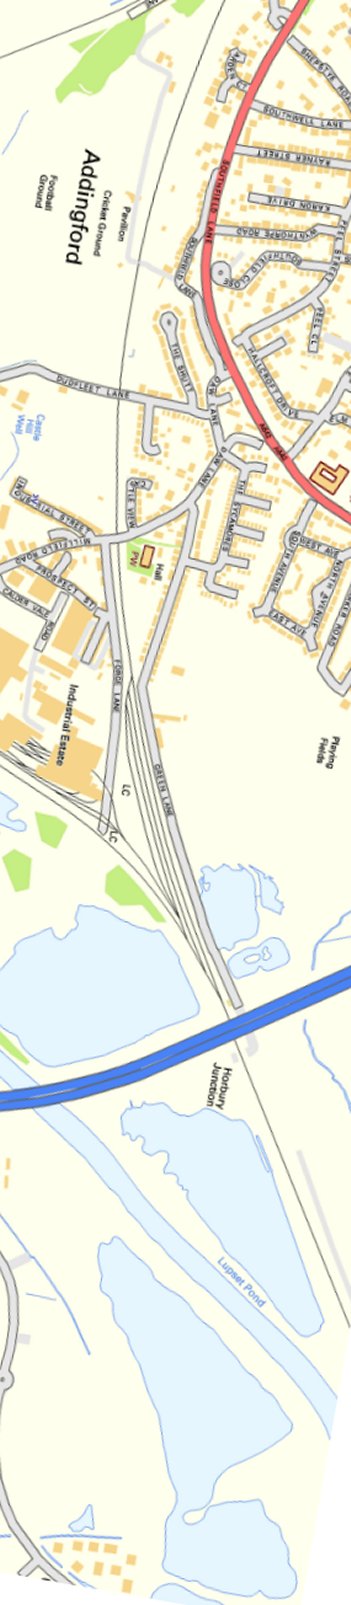 Section from Ordnance Survey OpenSource mapping 2013 showing L&YR railway line around Horbury Junction